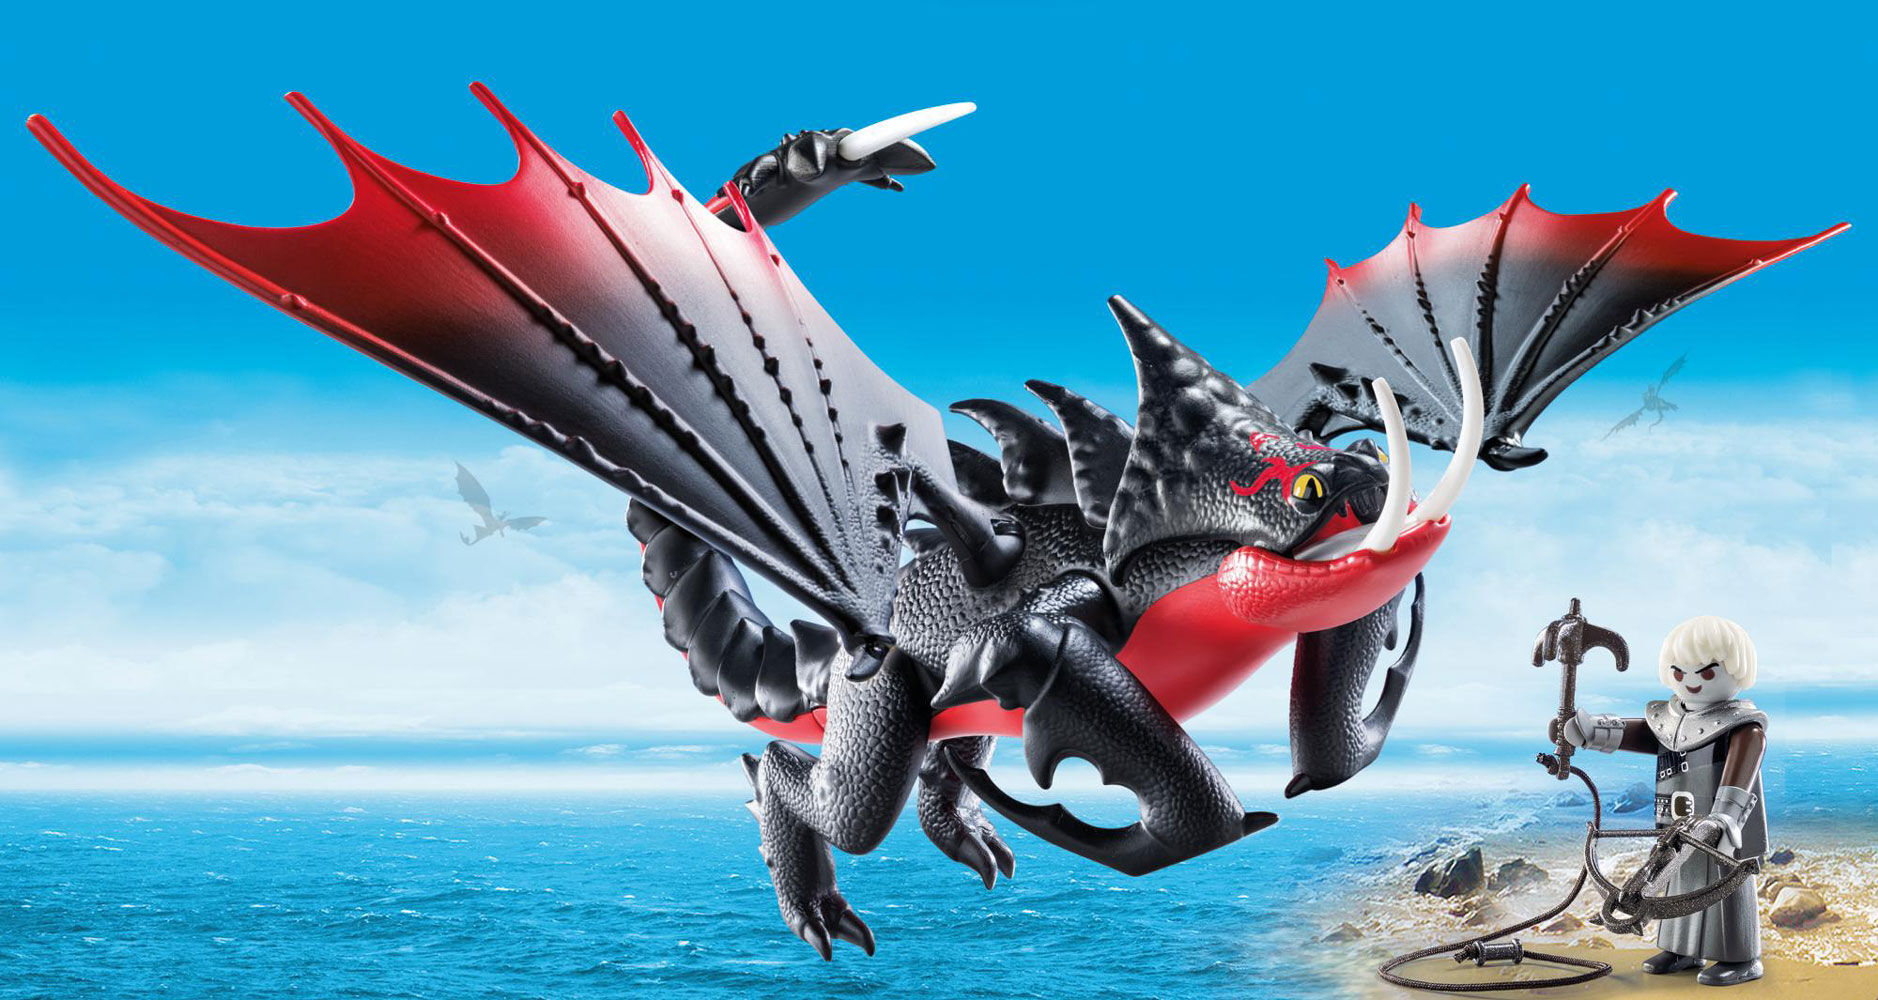 how to train your dragon 3 toys playmobil